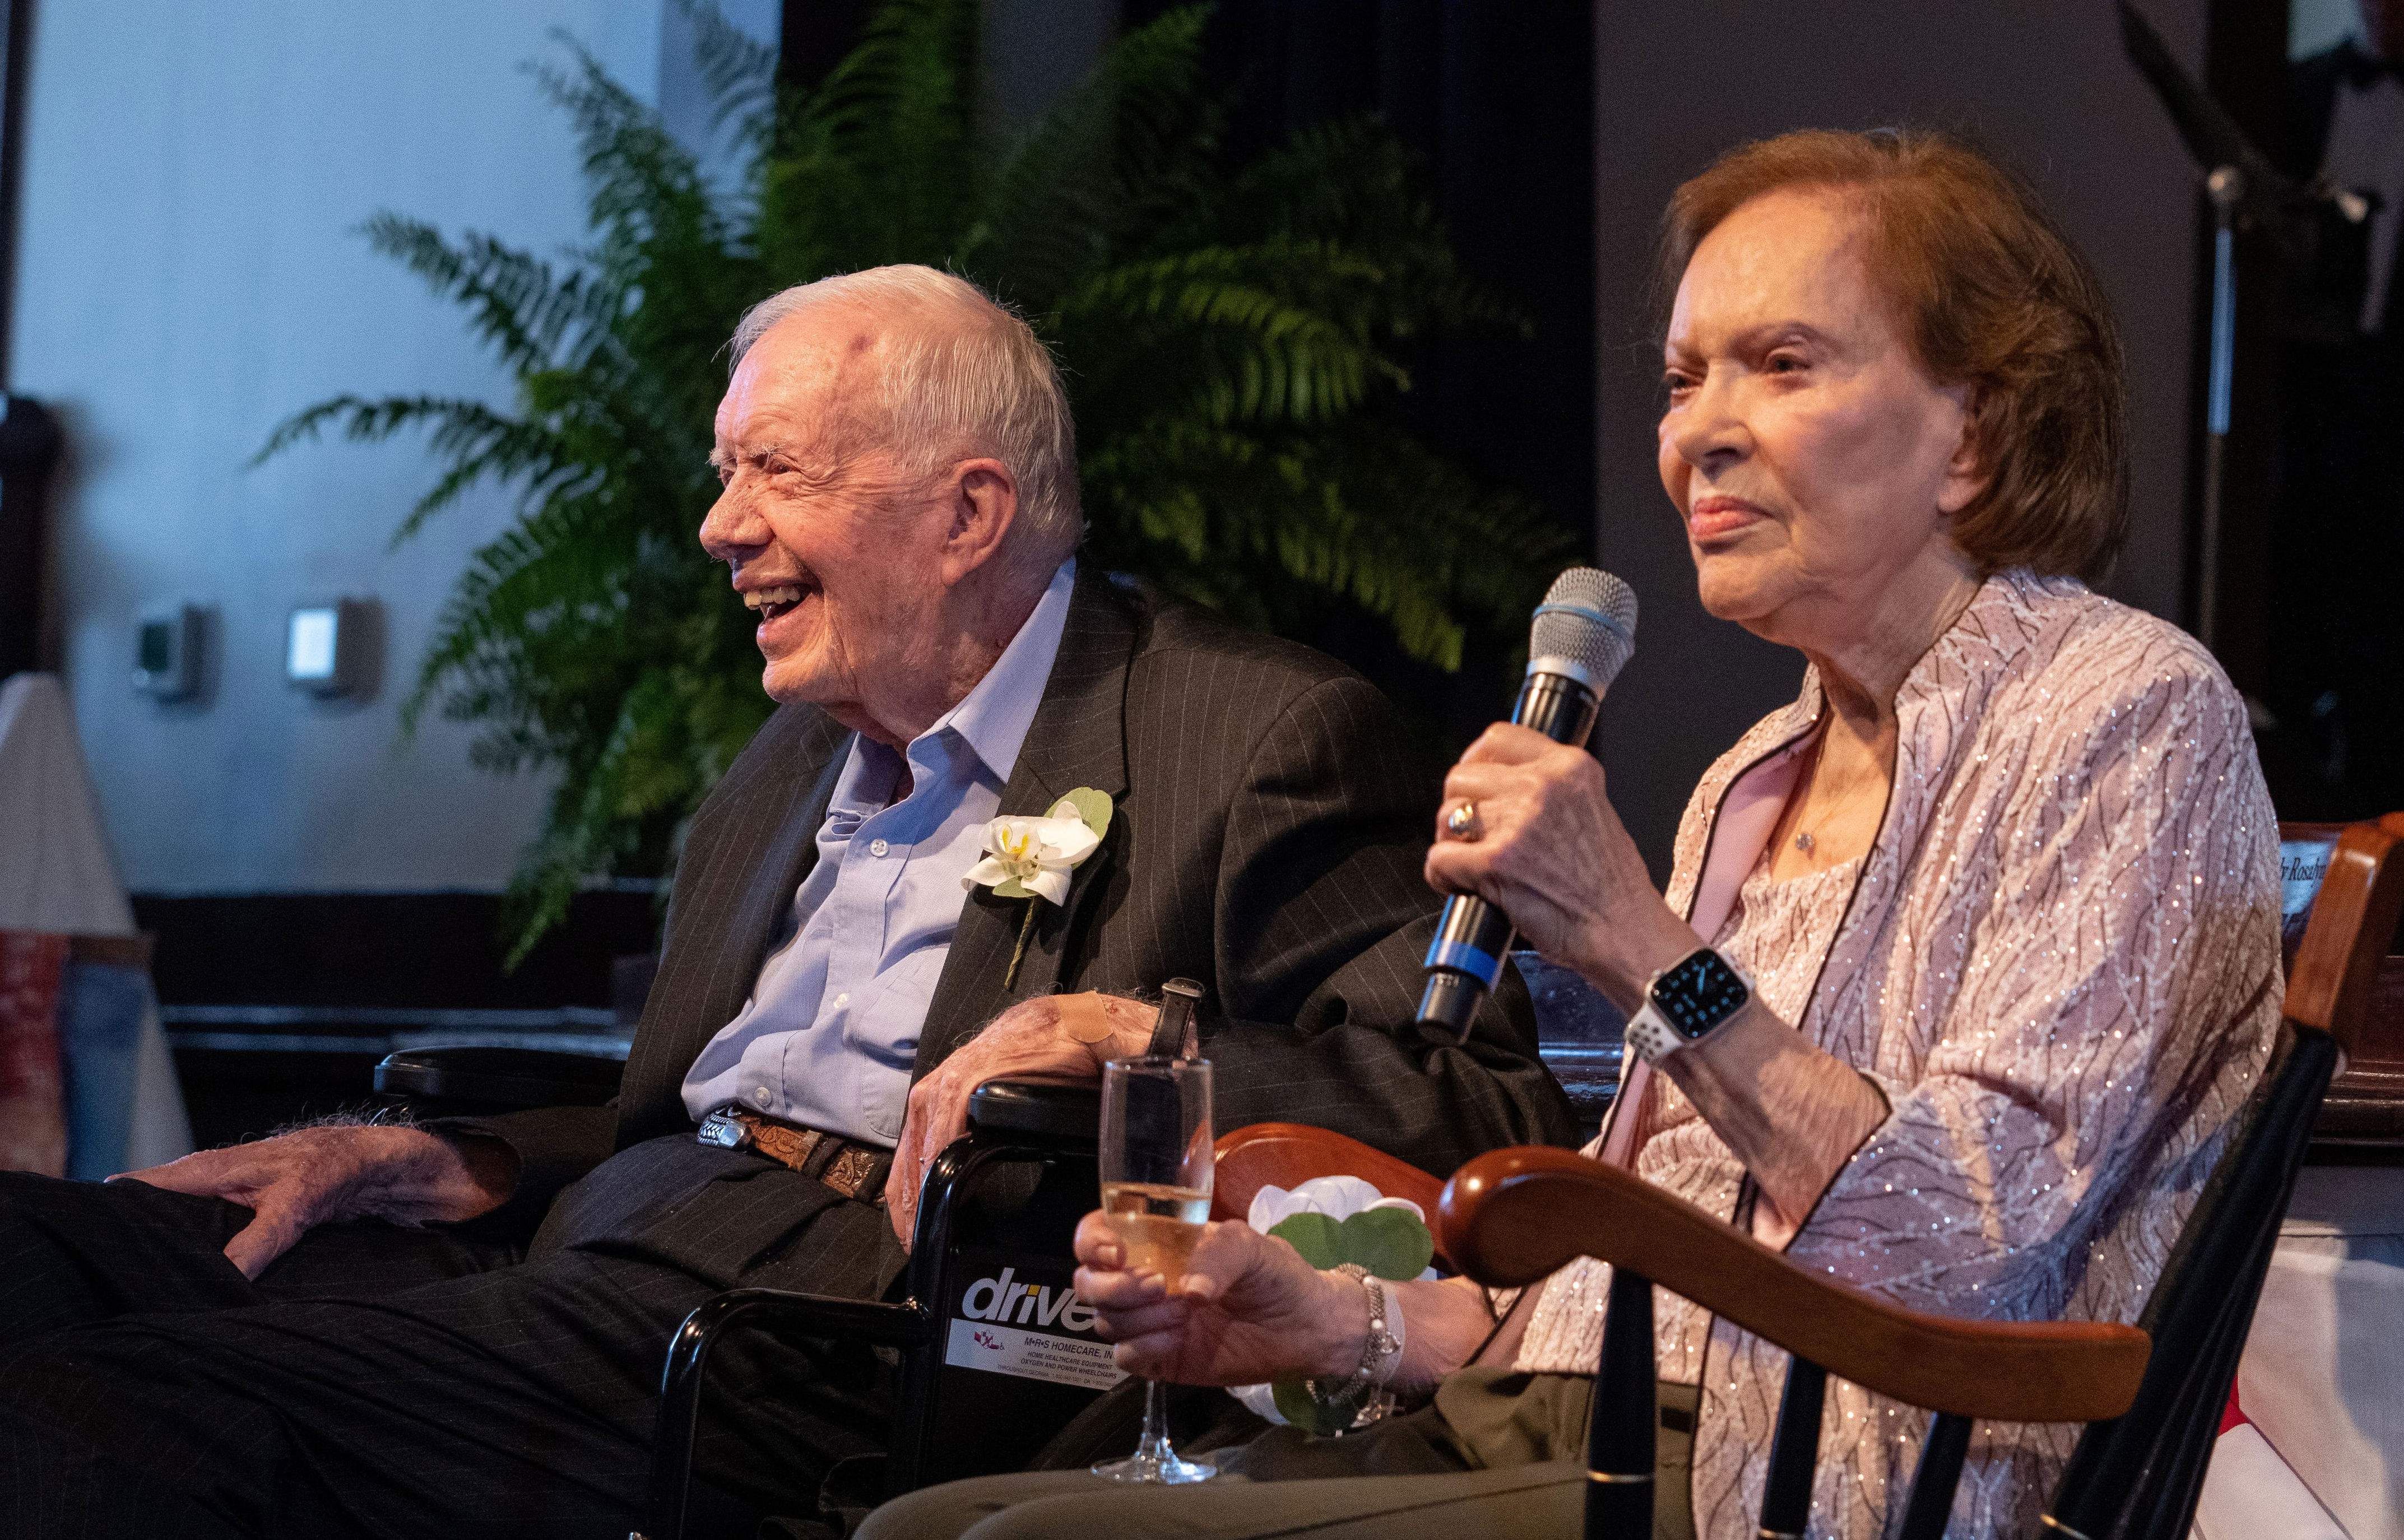 rosalynn carter: mourners pay tribute to wife of jimmy carter at memorial service